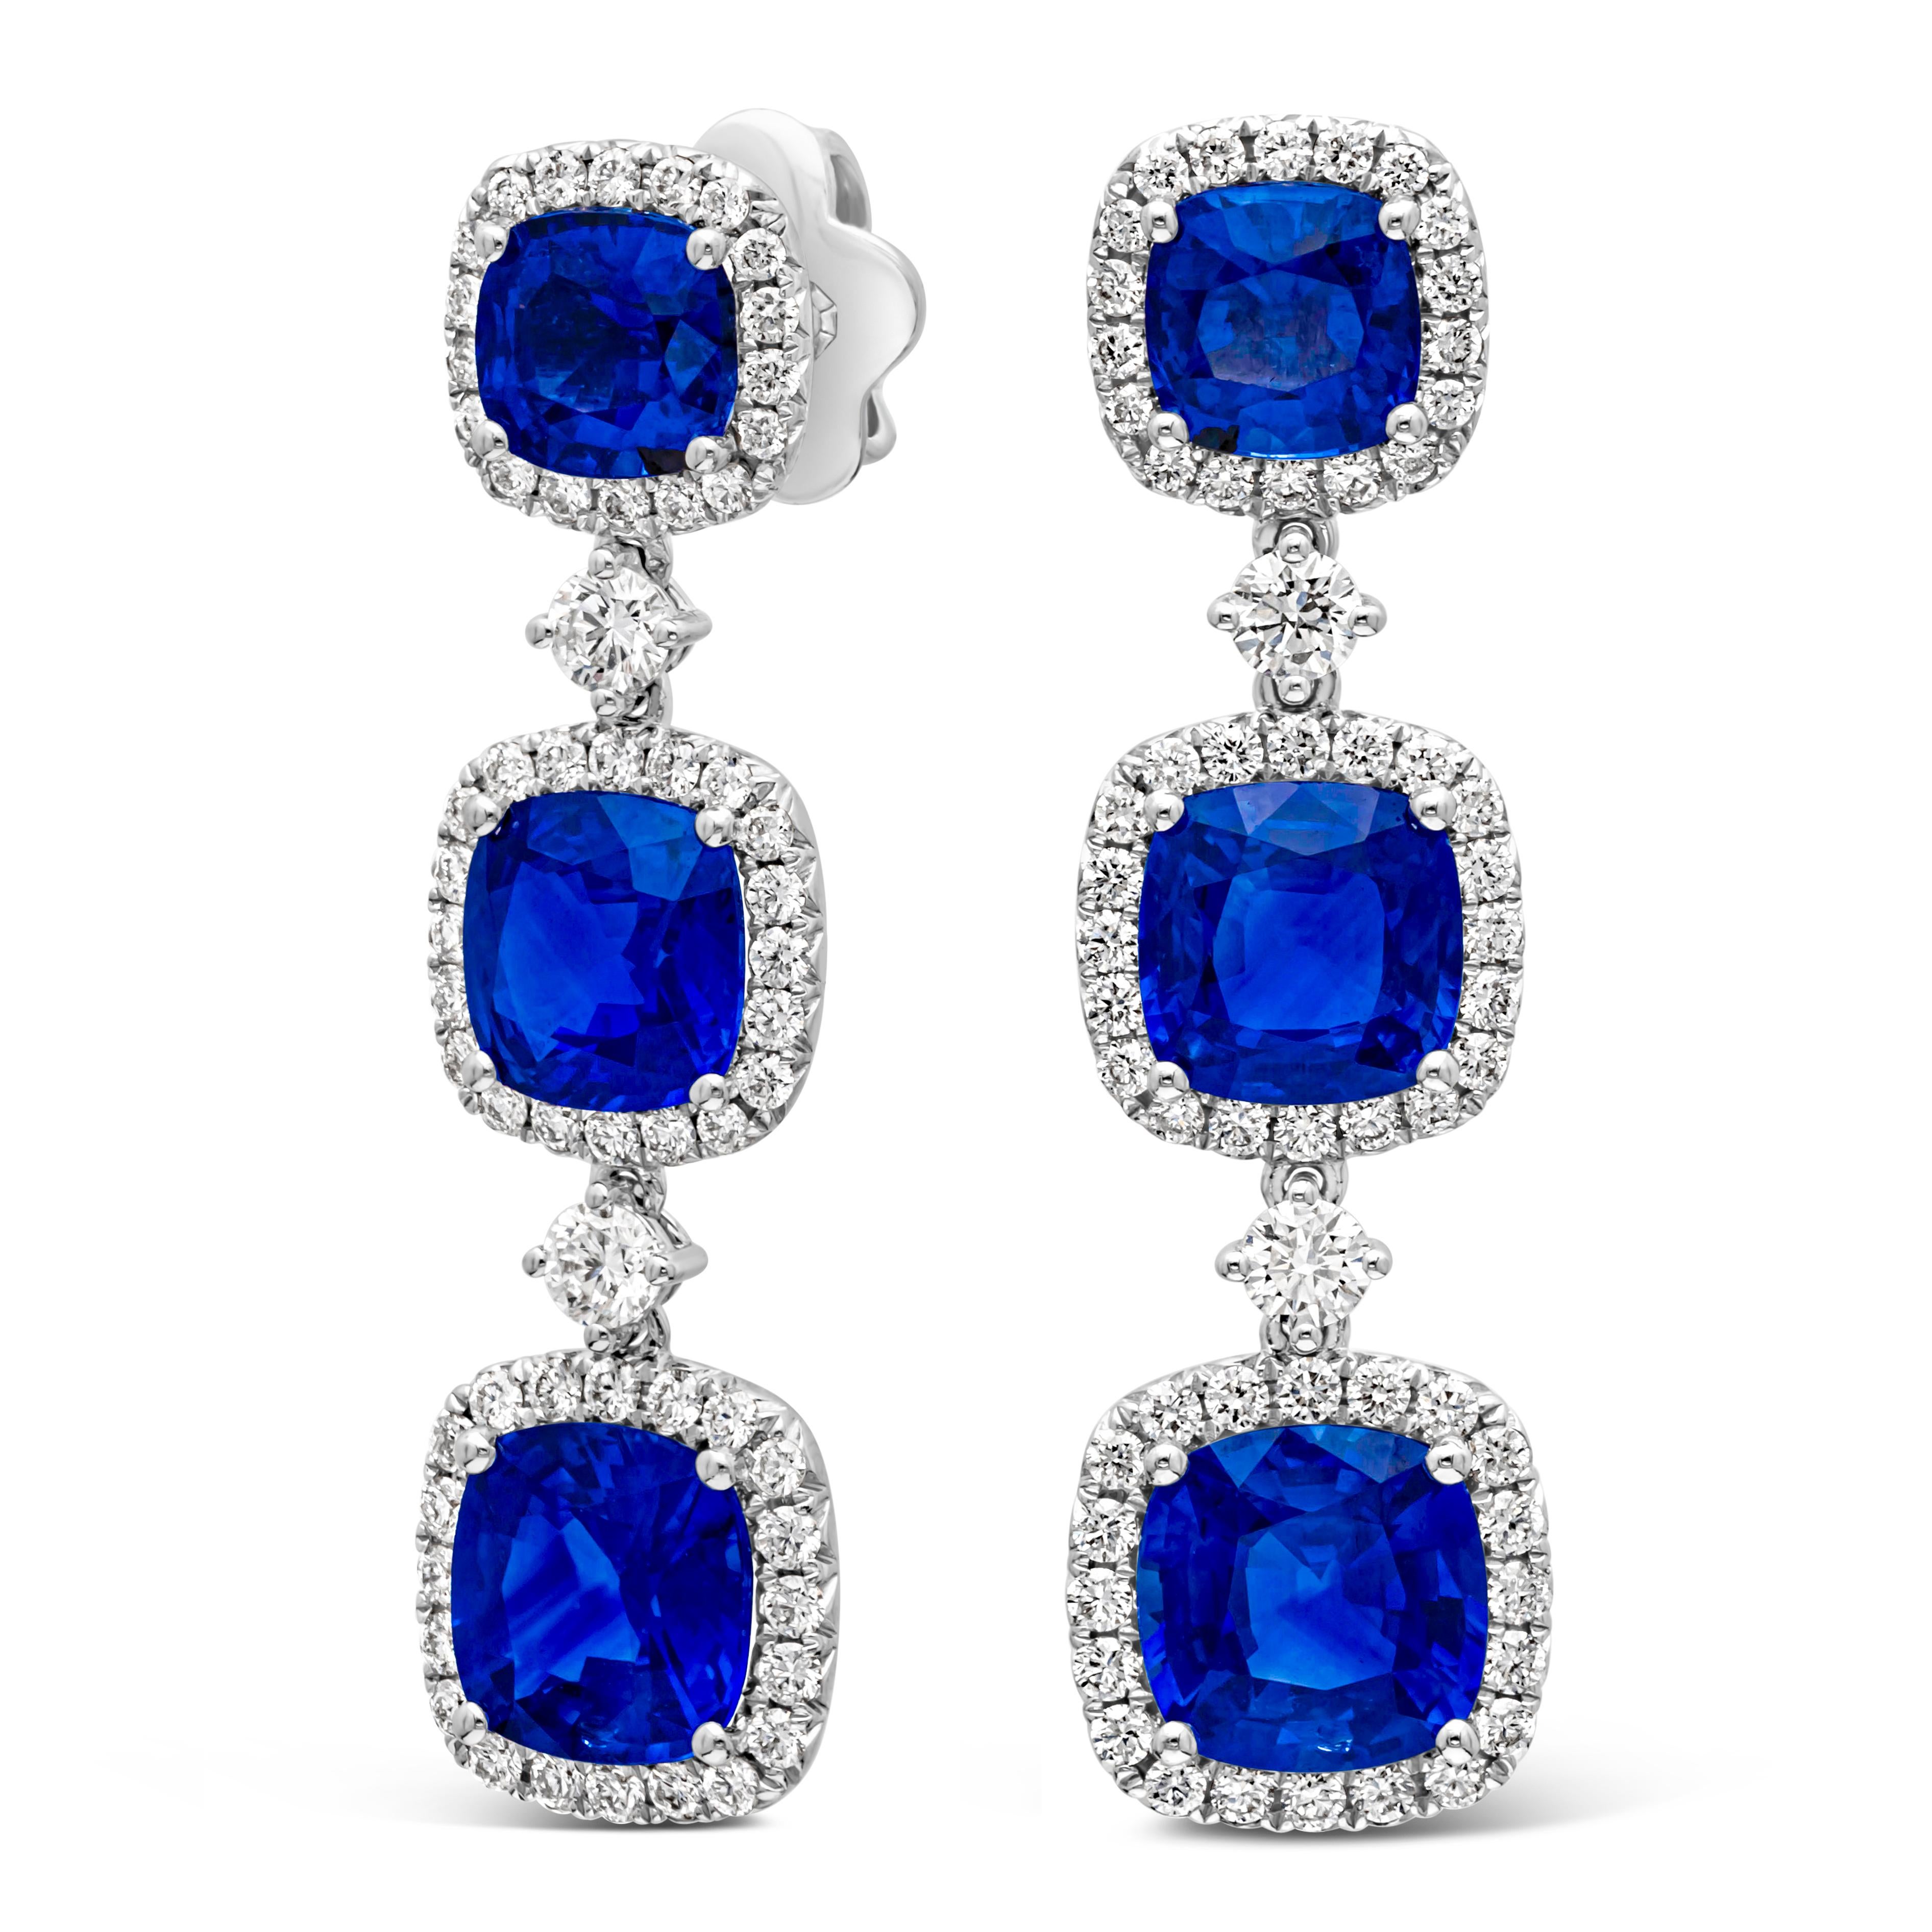 This stunning each dangle drop earring showcases three cushion cut color-rich blue sapphires surrounded by brilliant round cut diamonds in a halo design. Elegantly set in a dangle style and spaced with brilliant round diamonds. Blue sapphires weigh